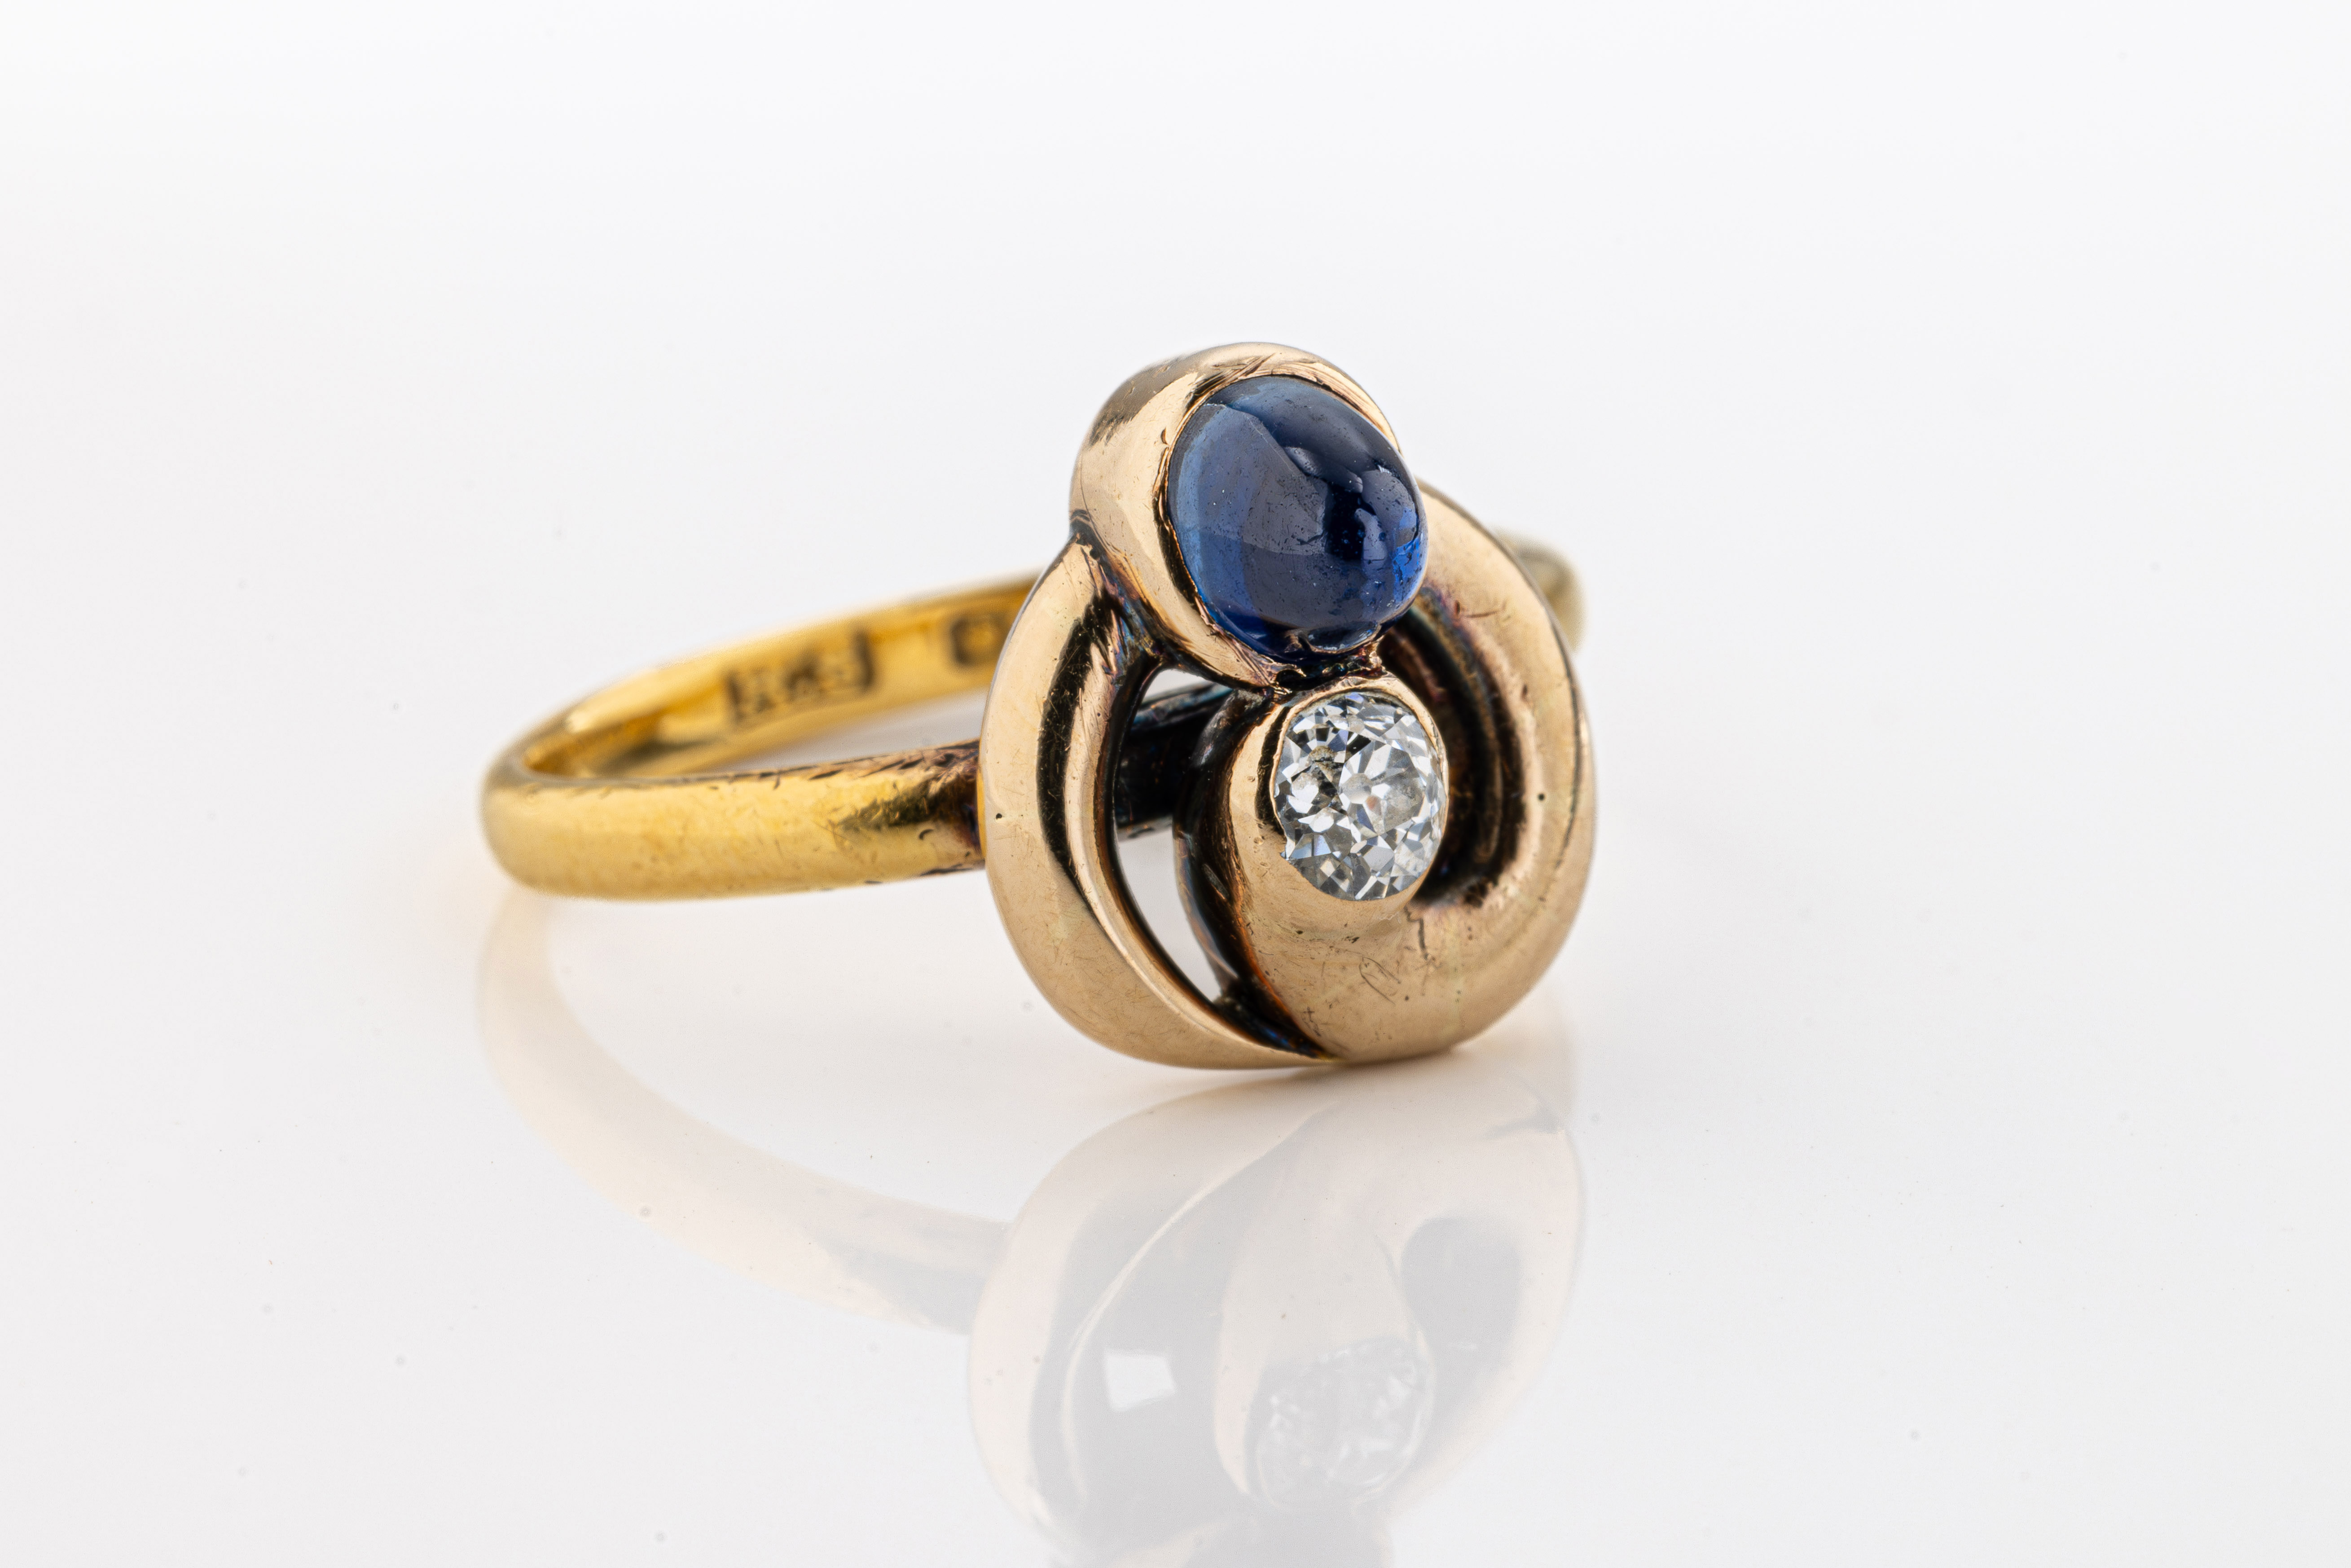 A 22ct yellow gold, diamond and sapphire ring